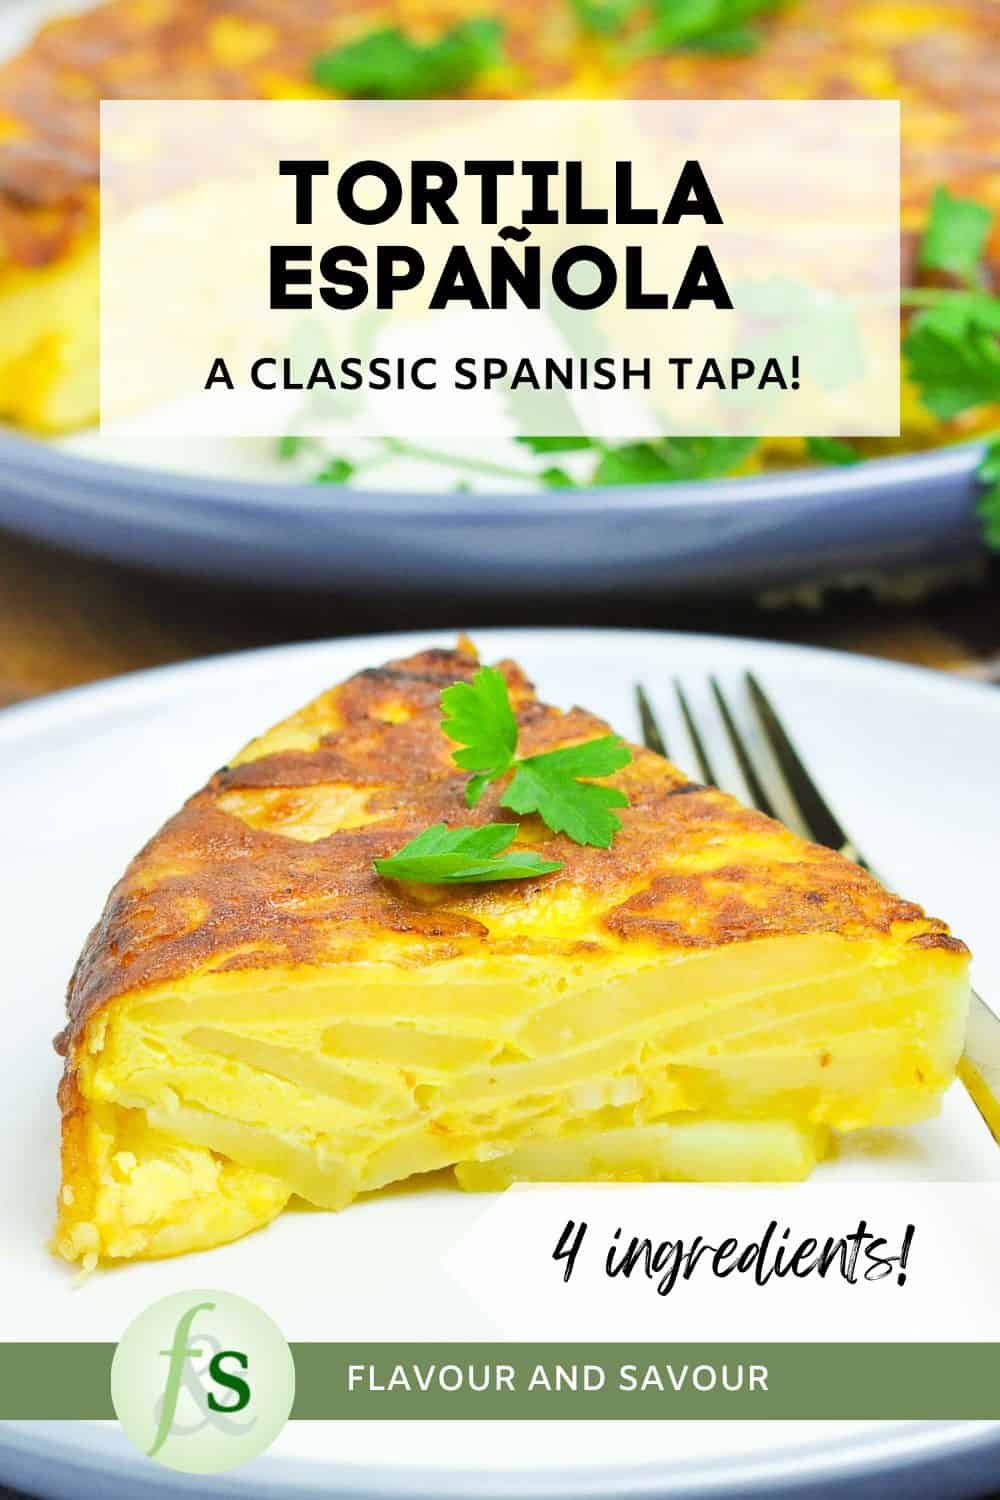 Image with text for tortilla española.